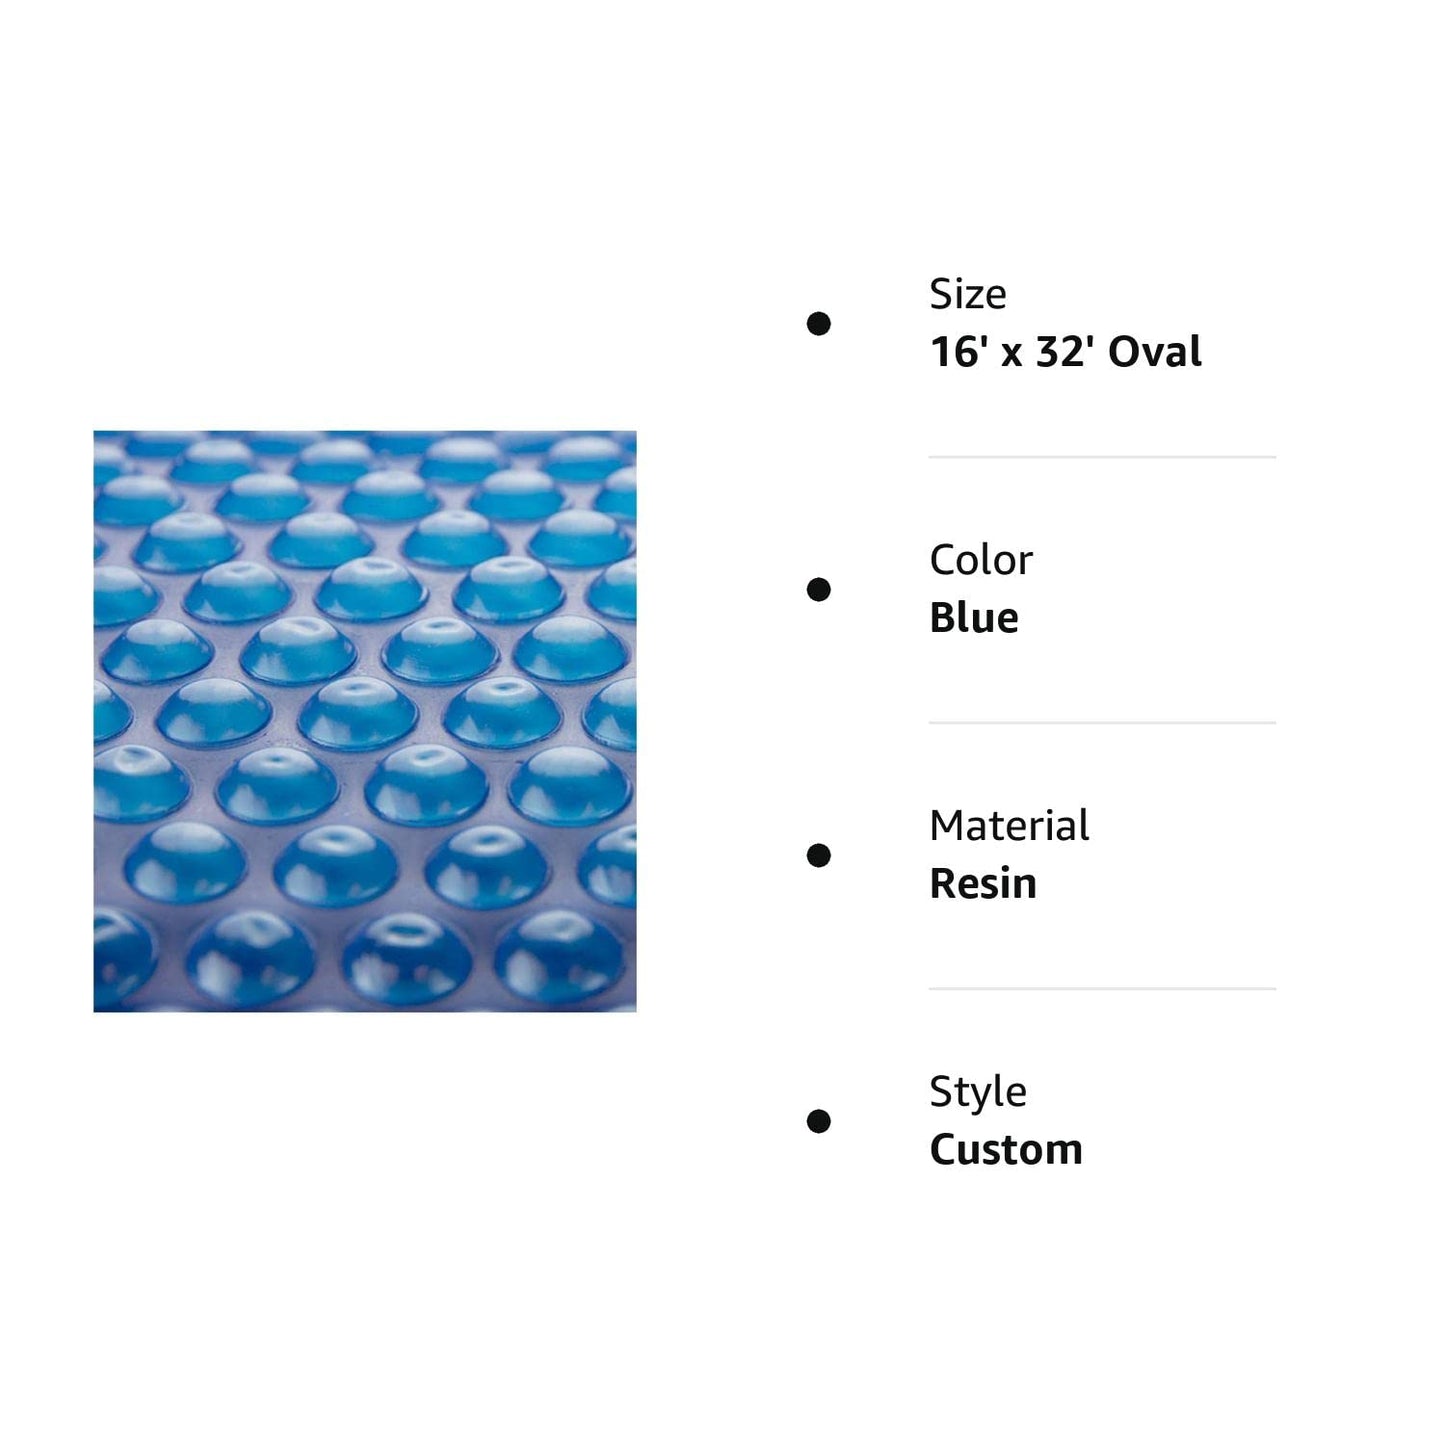 Sun2Solar Blue 21-Foot-by-41-Foot Oval Solar Cover | 1200 Series